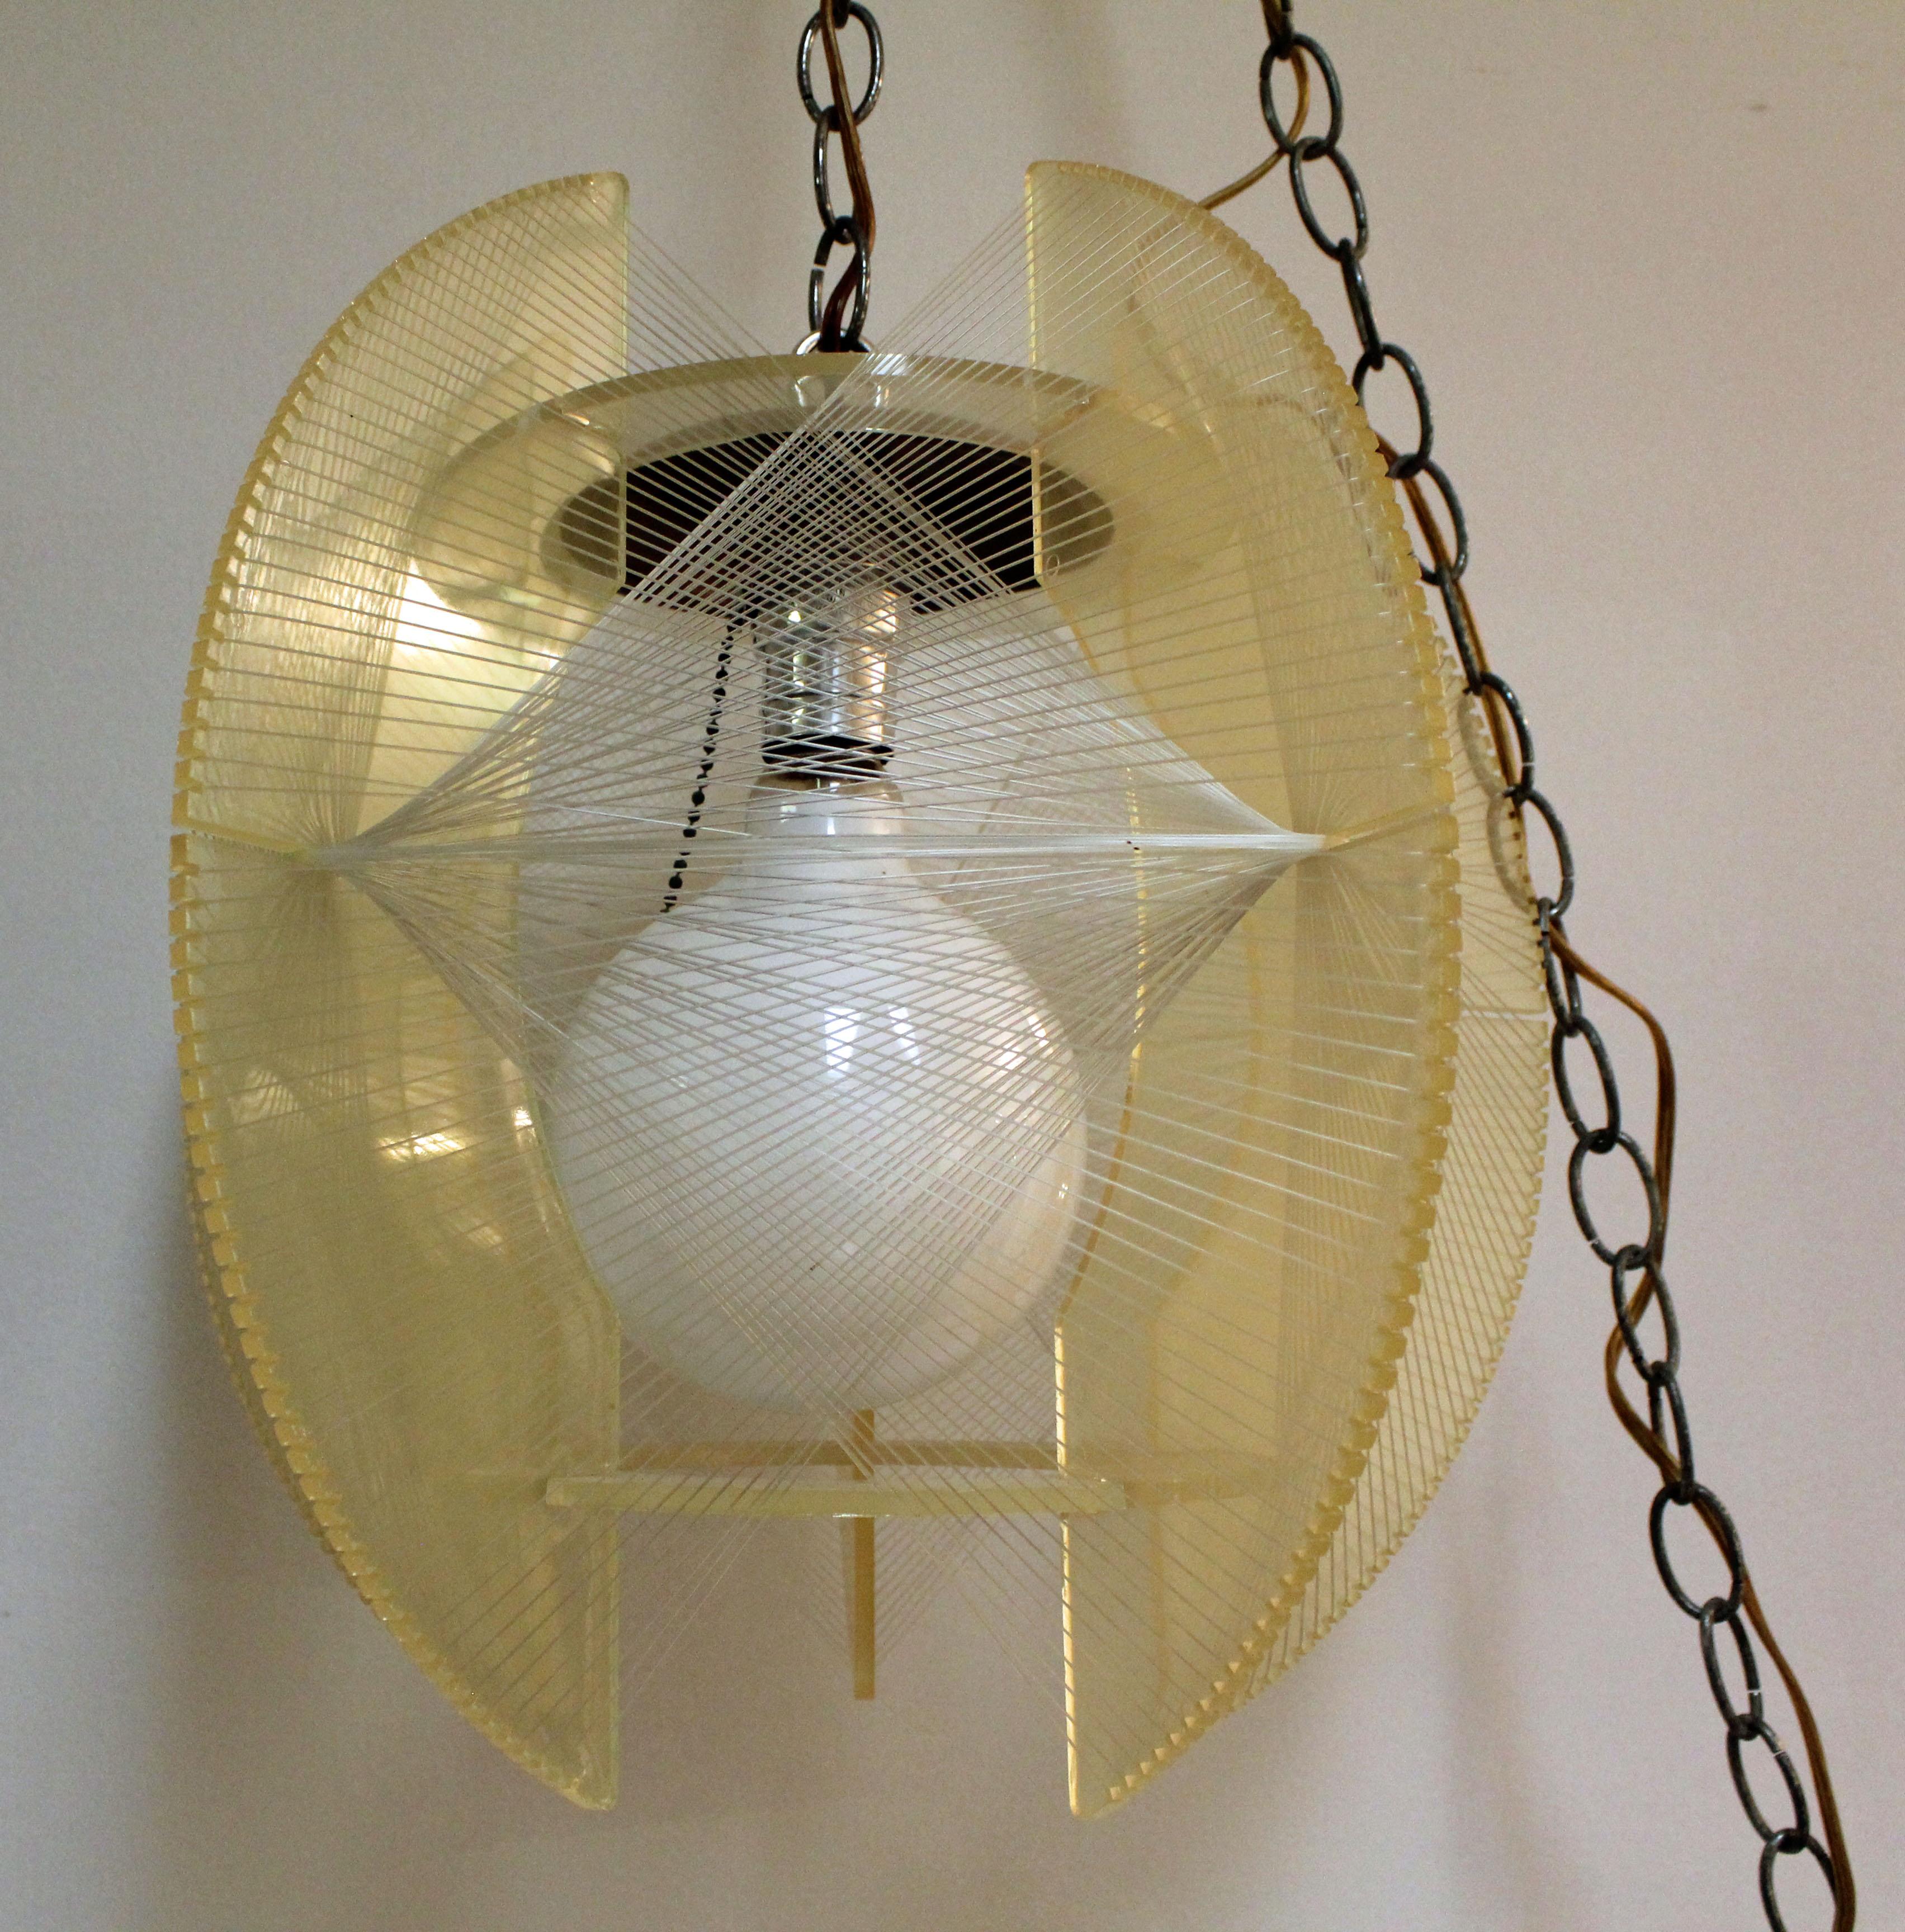 American Pair of Mid-Century Modern Lucite String Hanging Chain Pendant Lighting/Lamps